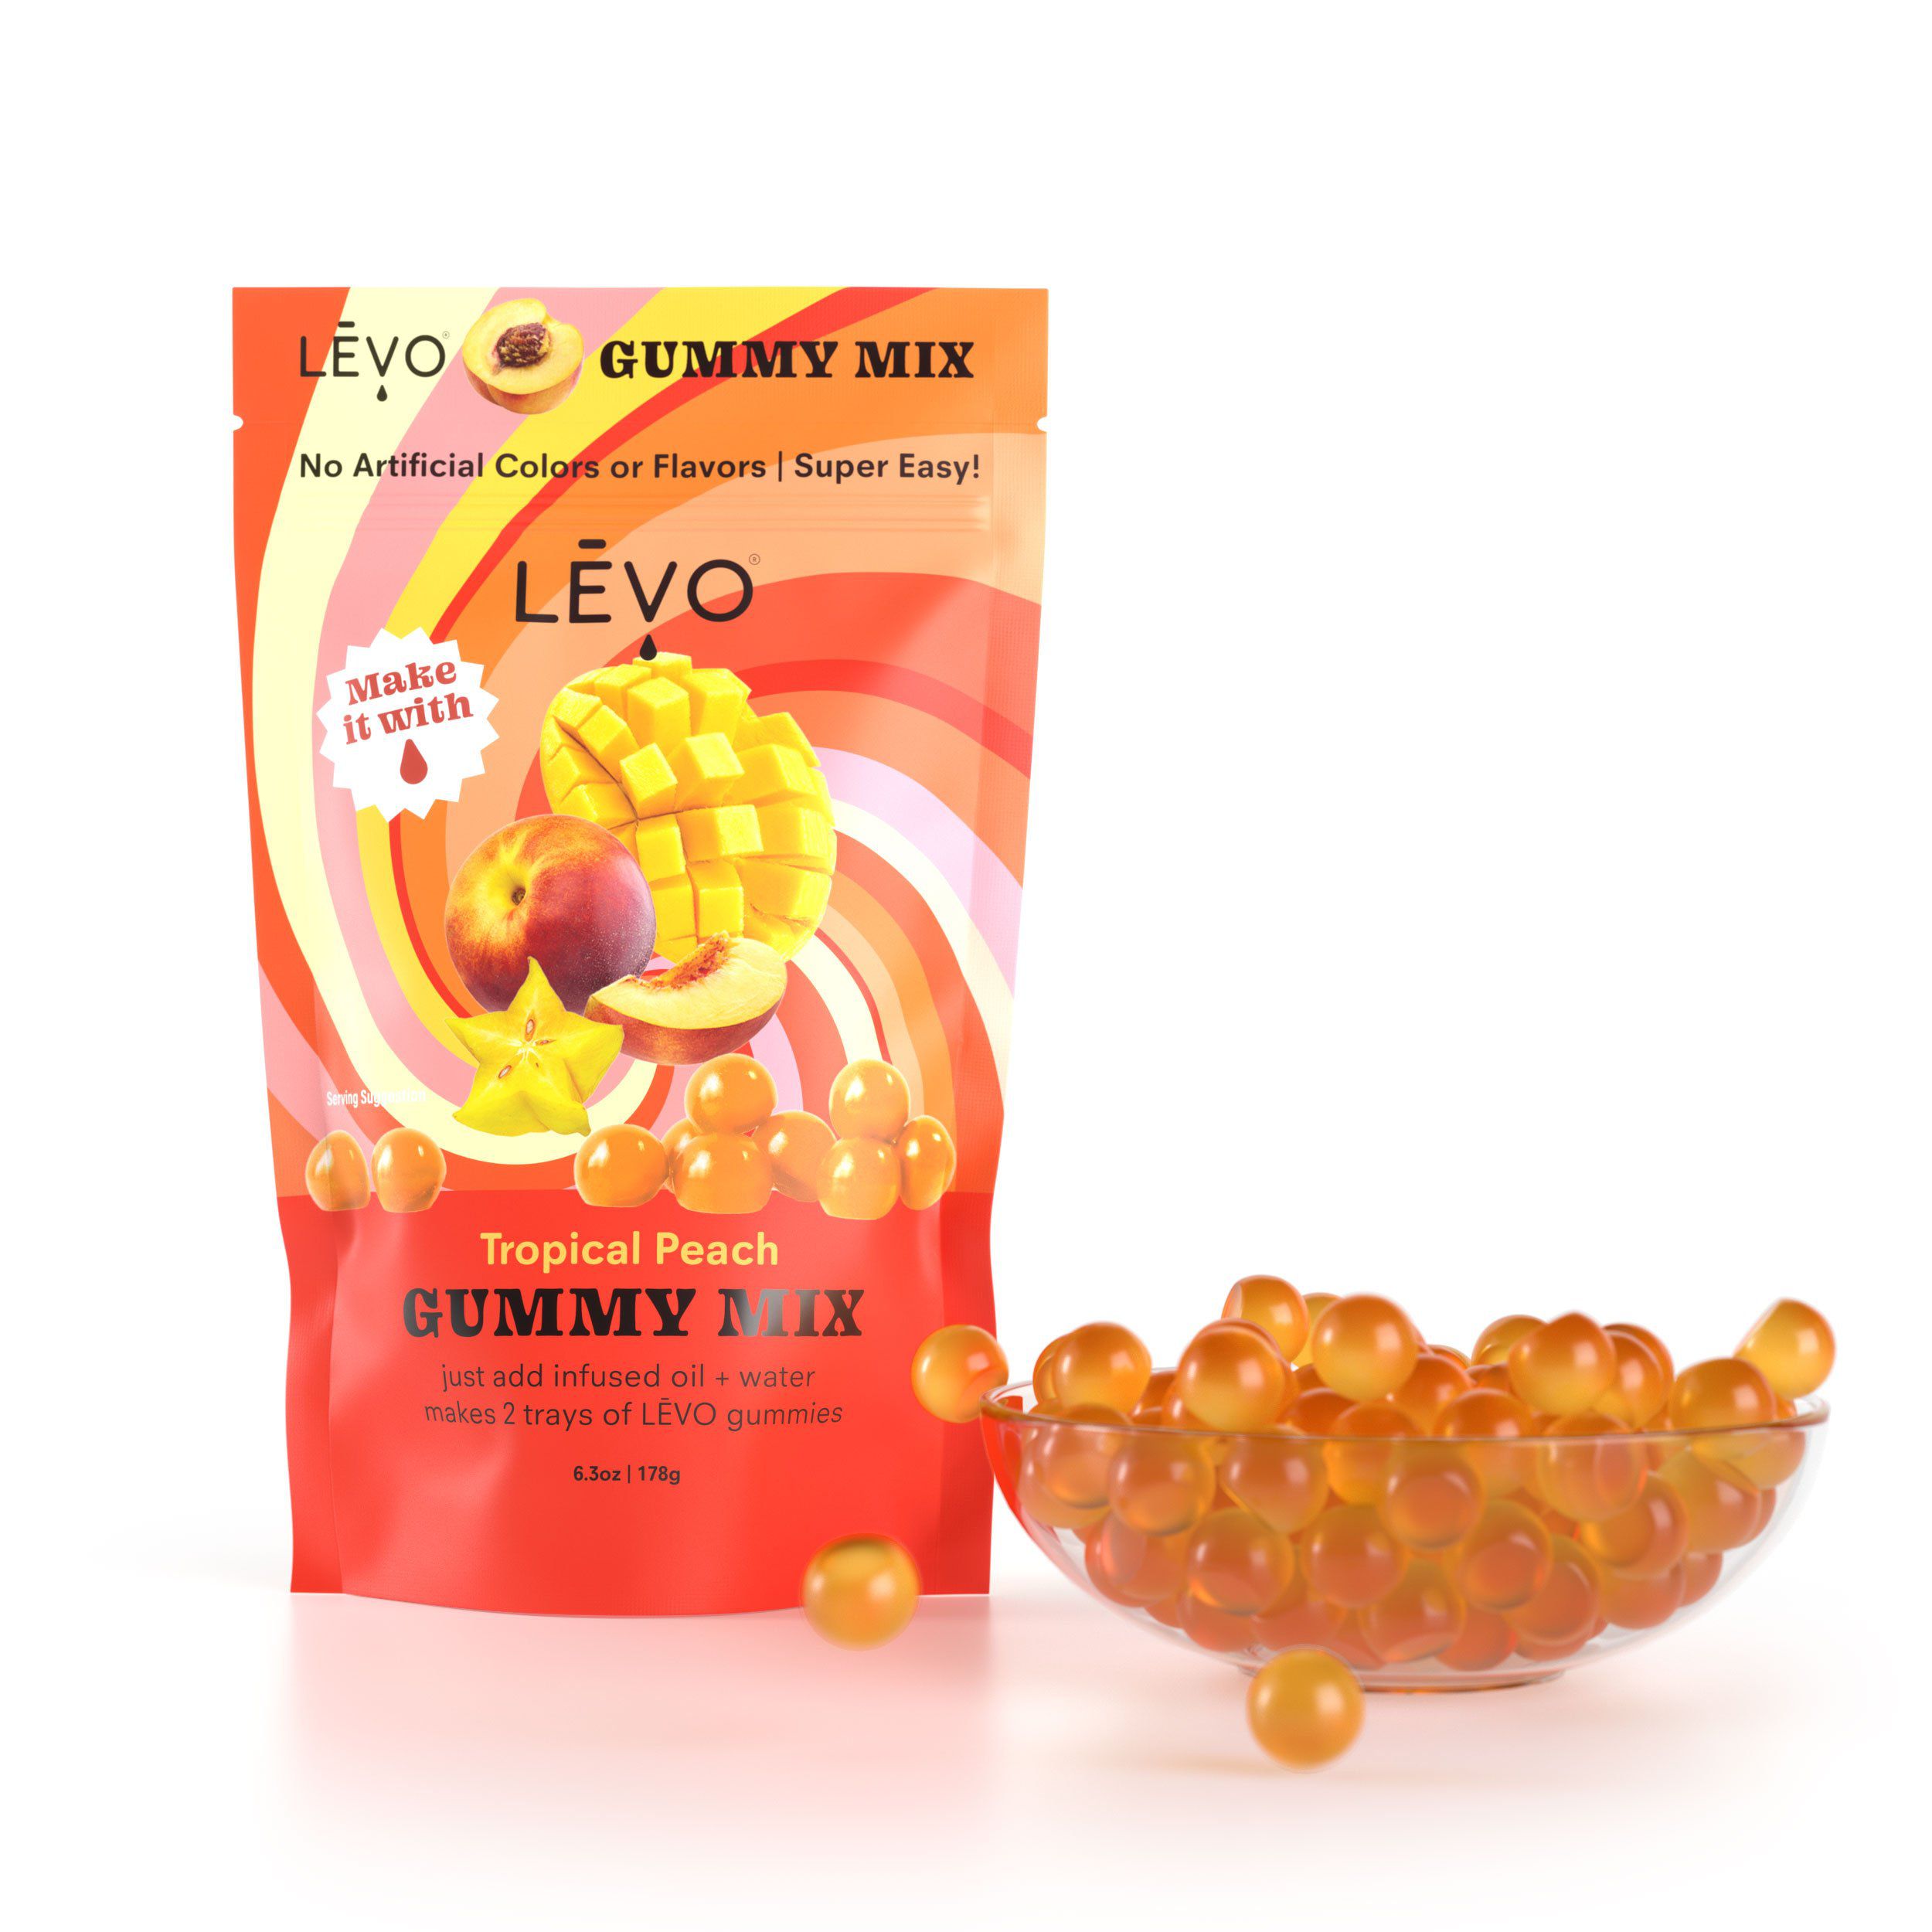 LEVO Tropical Peach powdered DIY gummy mix packet. No artificial colors or flavors. Super easy to make. 